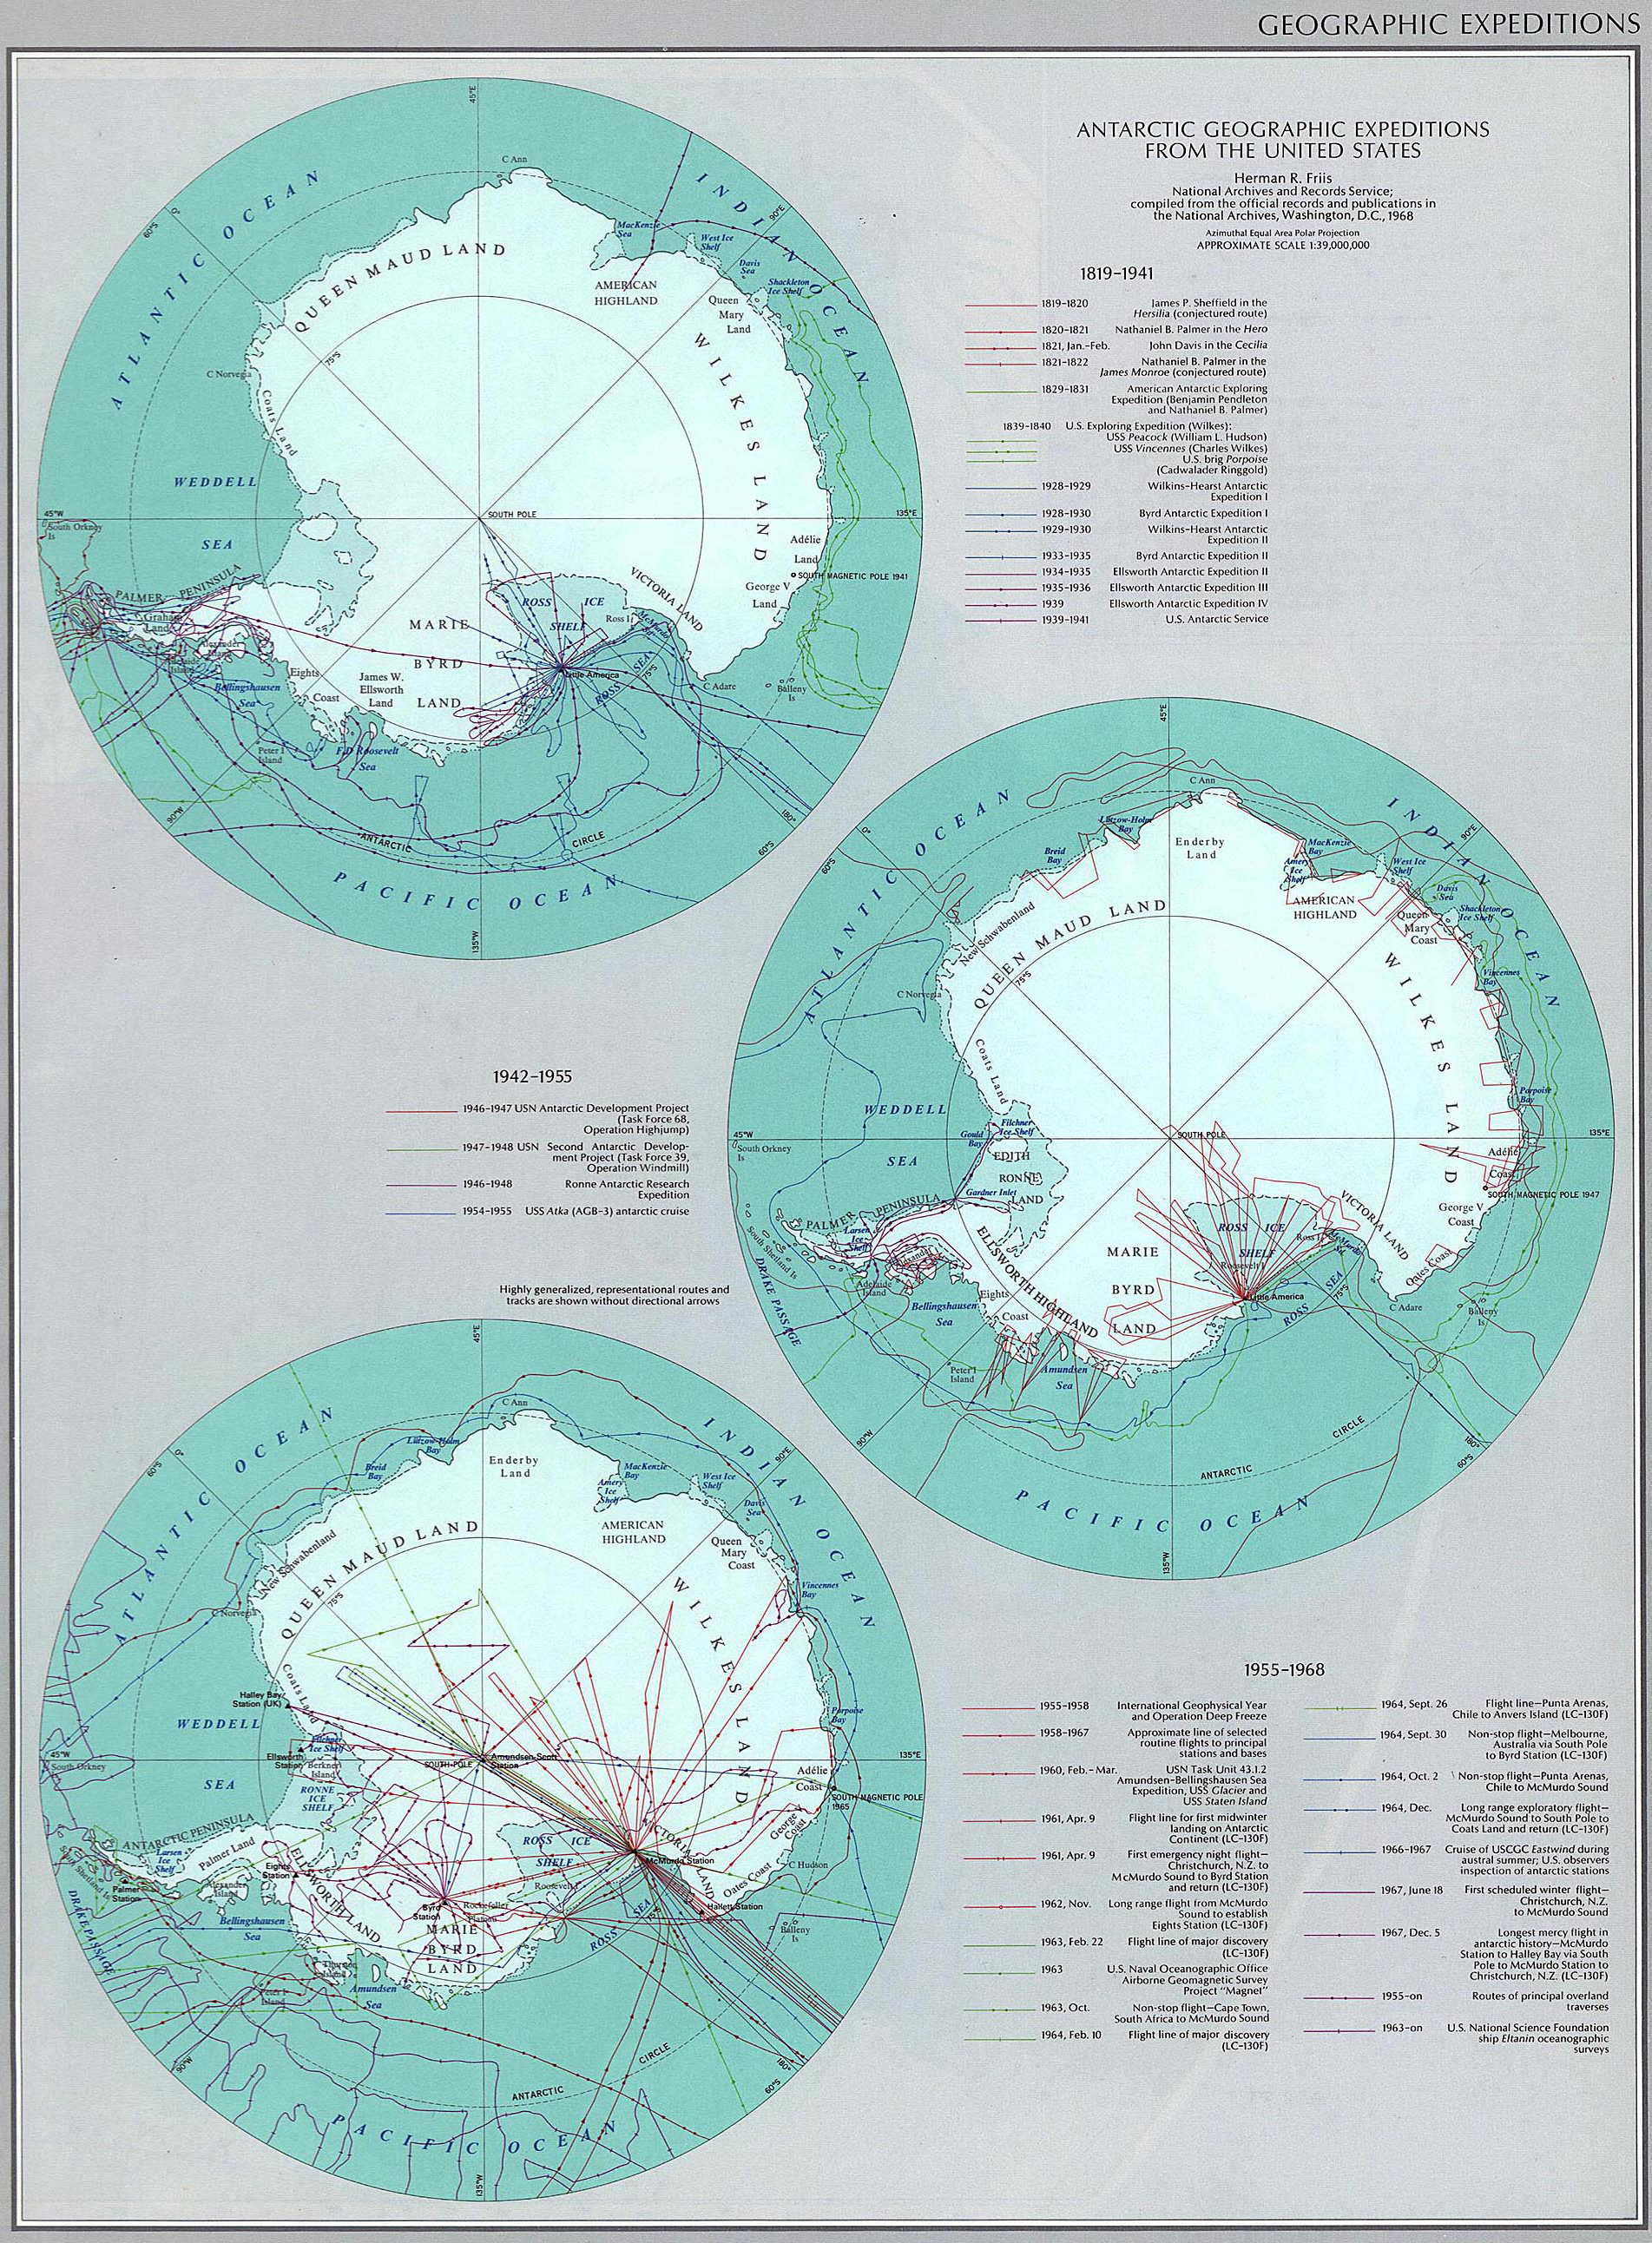 Map of Antarctic Geographic Expeditions From the United States